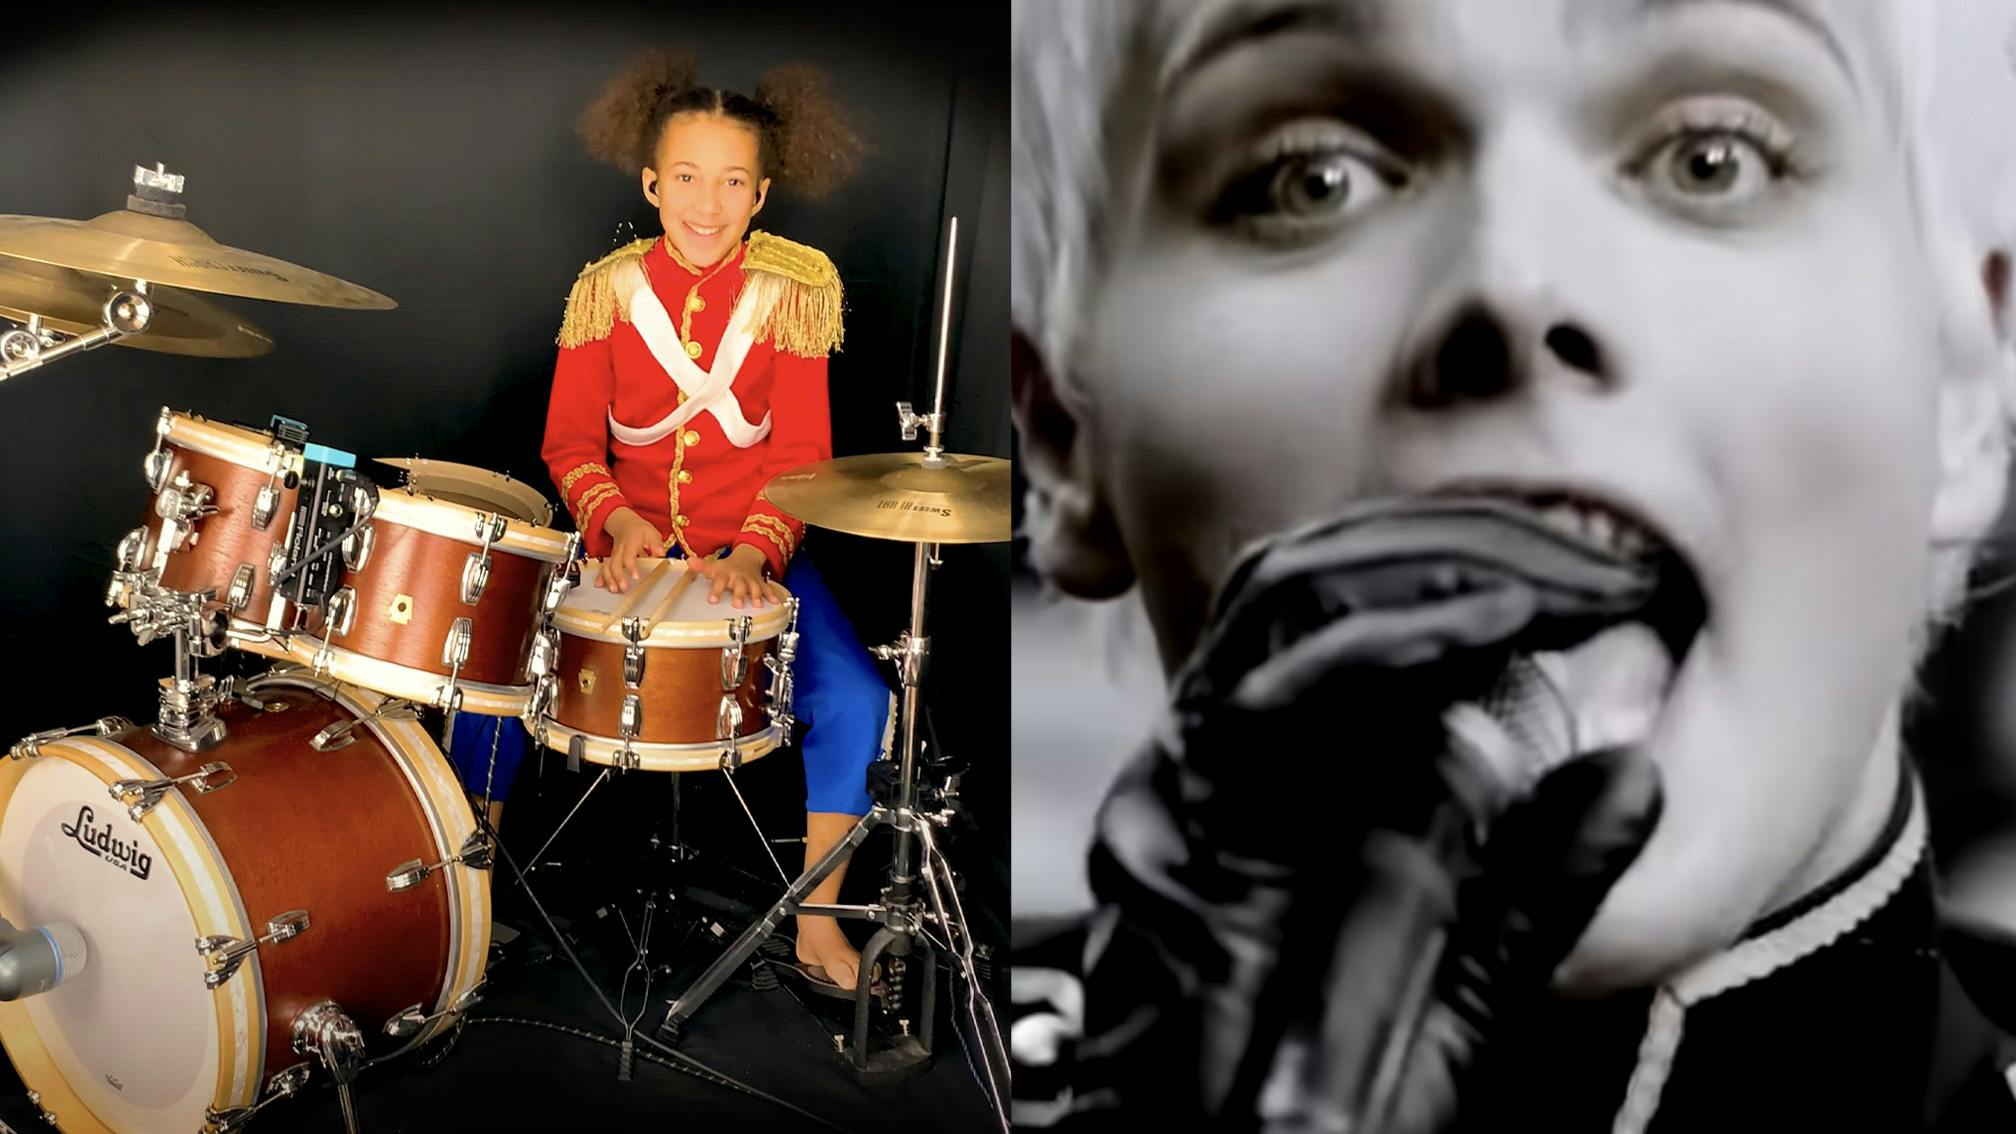 Watch Nandi Bushell's epic drum cover of My Chemical Romance's Welcome To The Black Parade